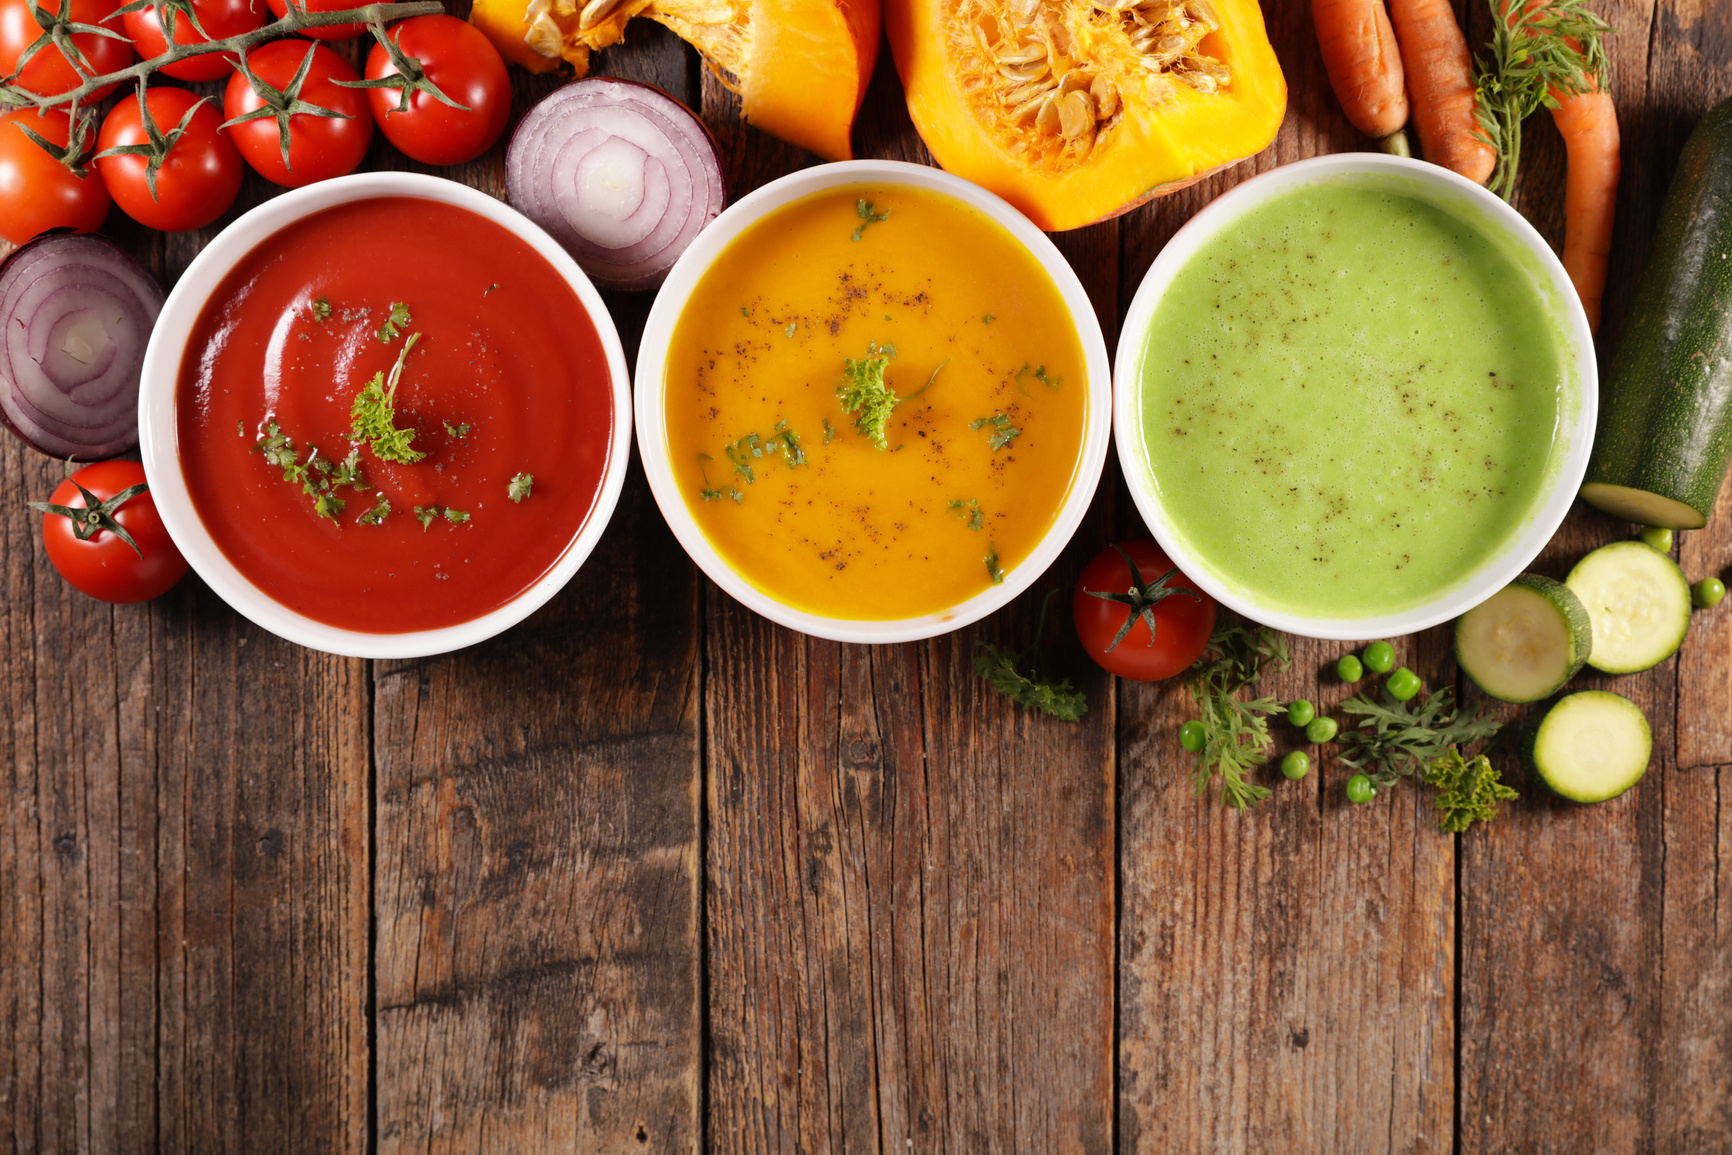 vegetable soup, carrot soup- tomato soup and zucchini soup